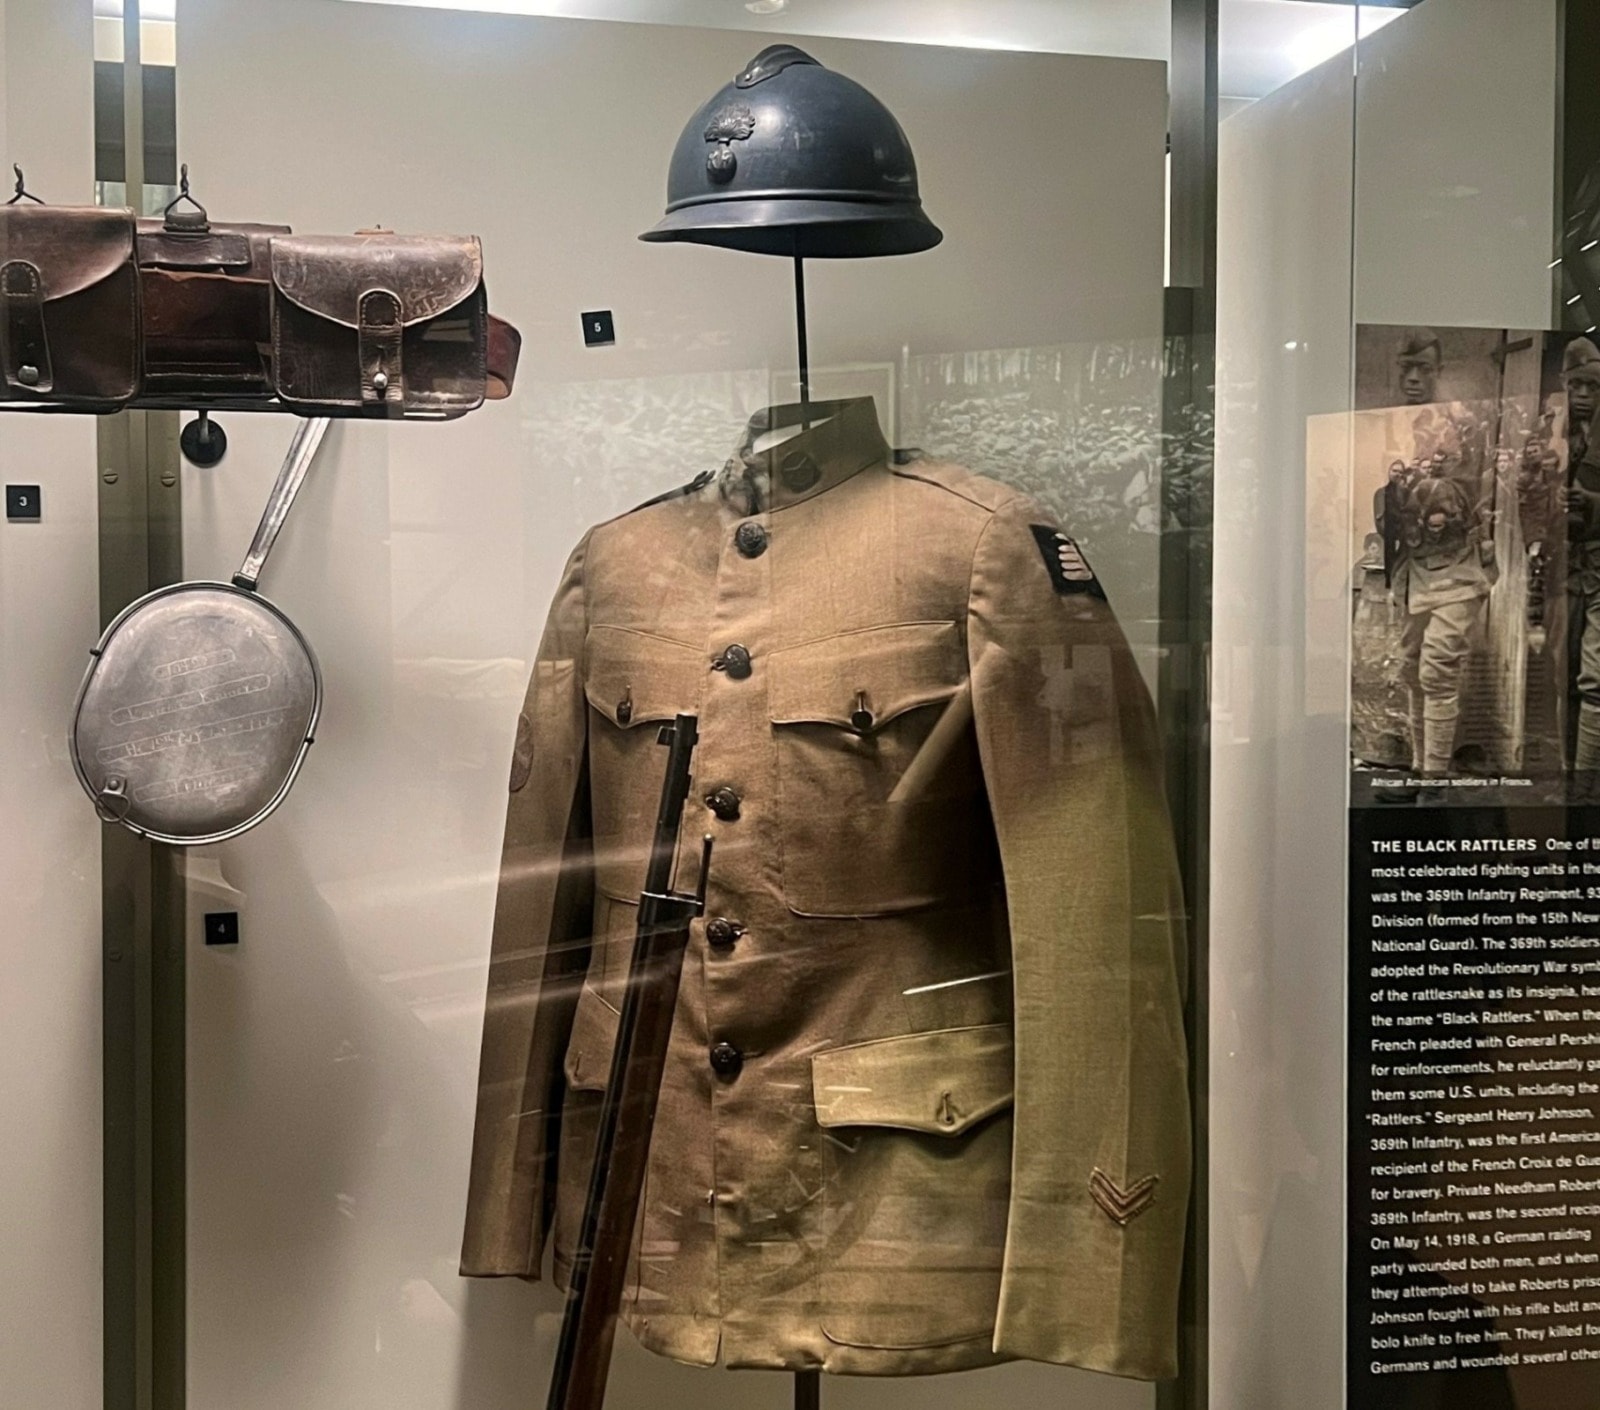 The National WWI Museum and Memorial displays a “Rattlers” uniform that includes a rattlesnake insignia on the left sleeve and also is accompanied by a French helmet, signifying the regiment served under French command in 1918.